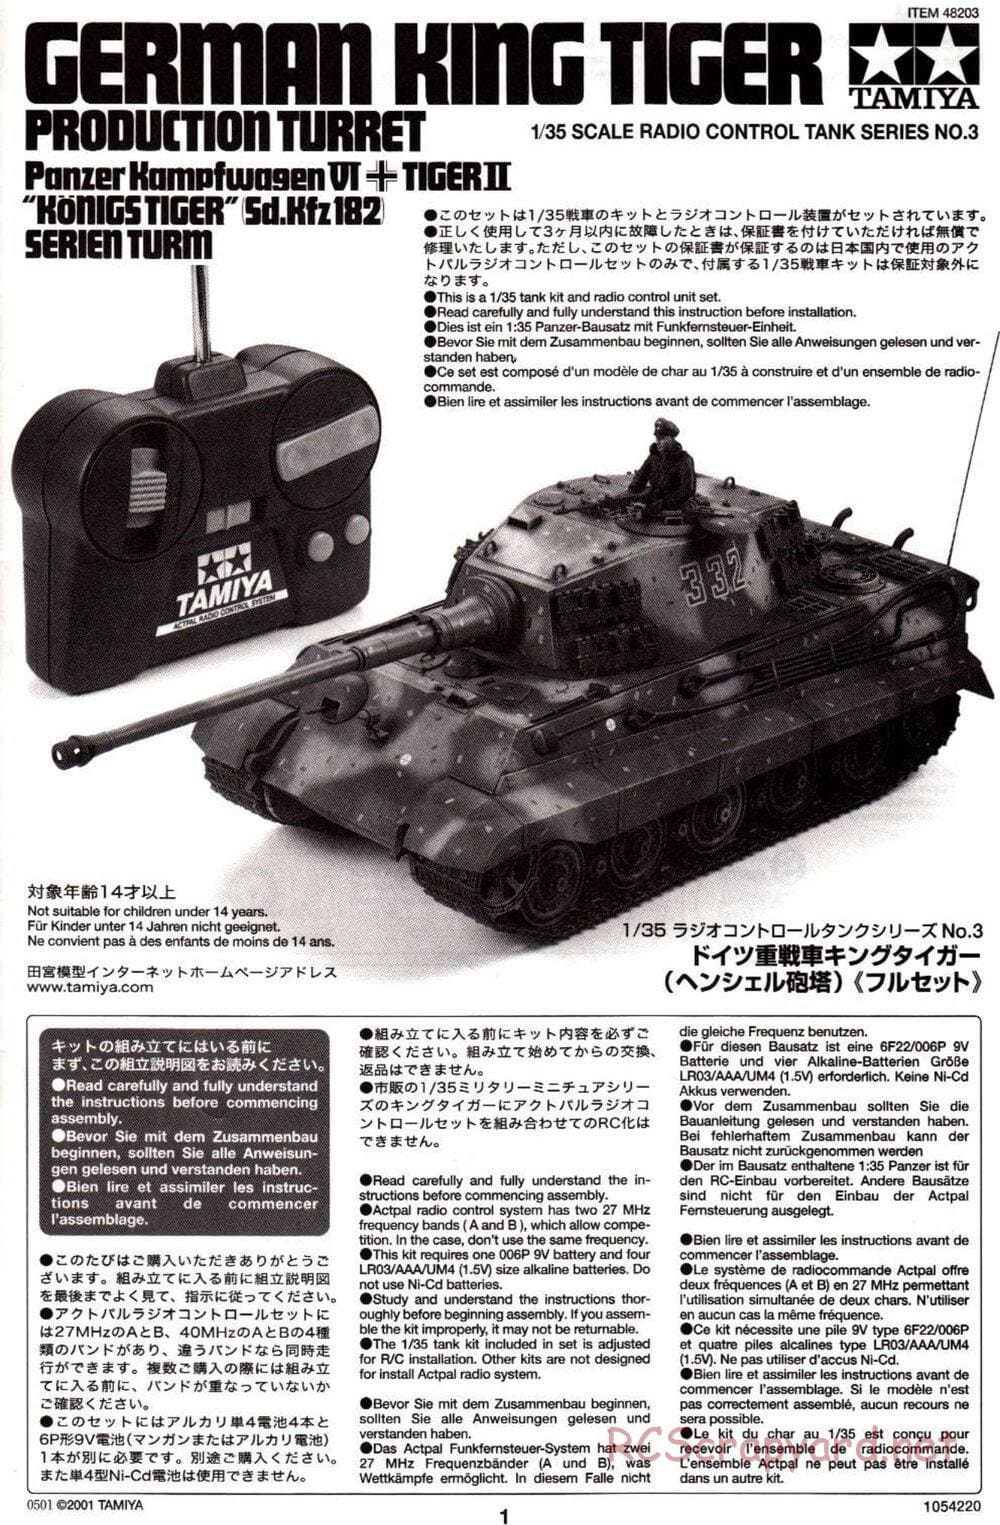 Tamiya - German King Tiger (Production Turret) - 1/35 Scale Chassis - Manual - Page 1